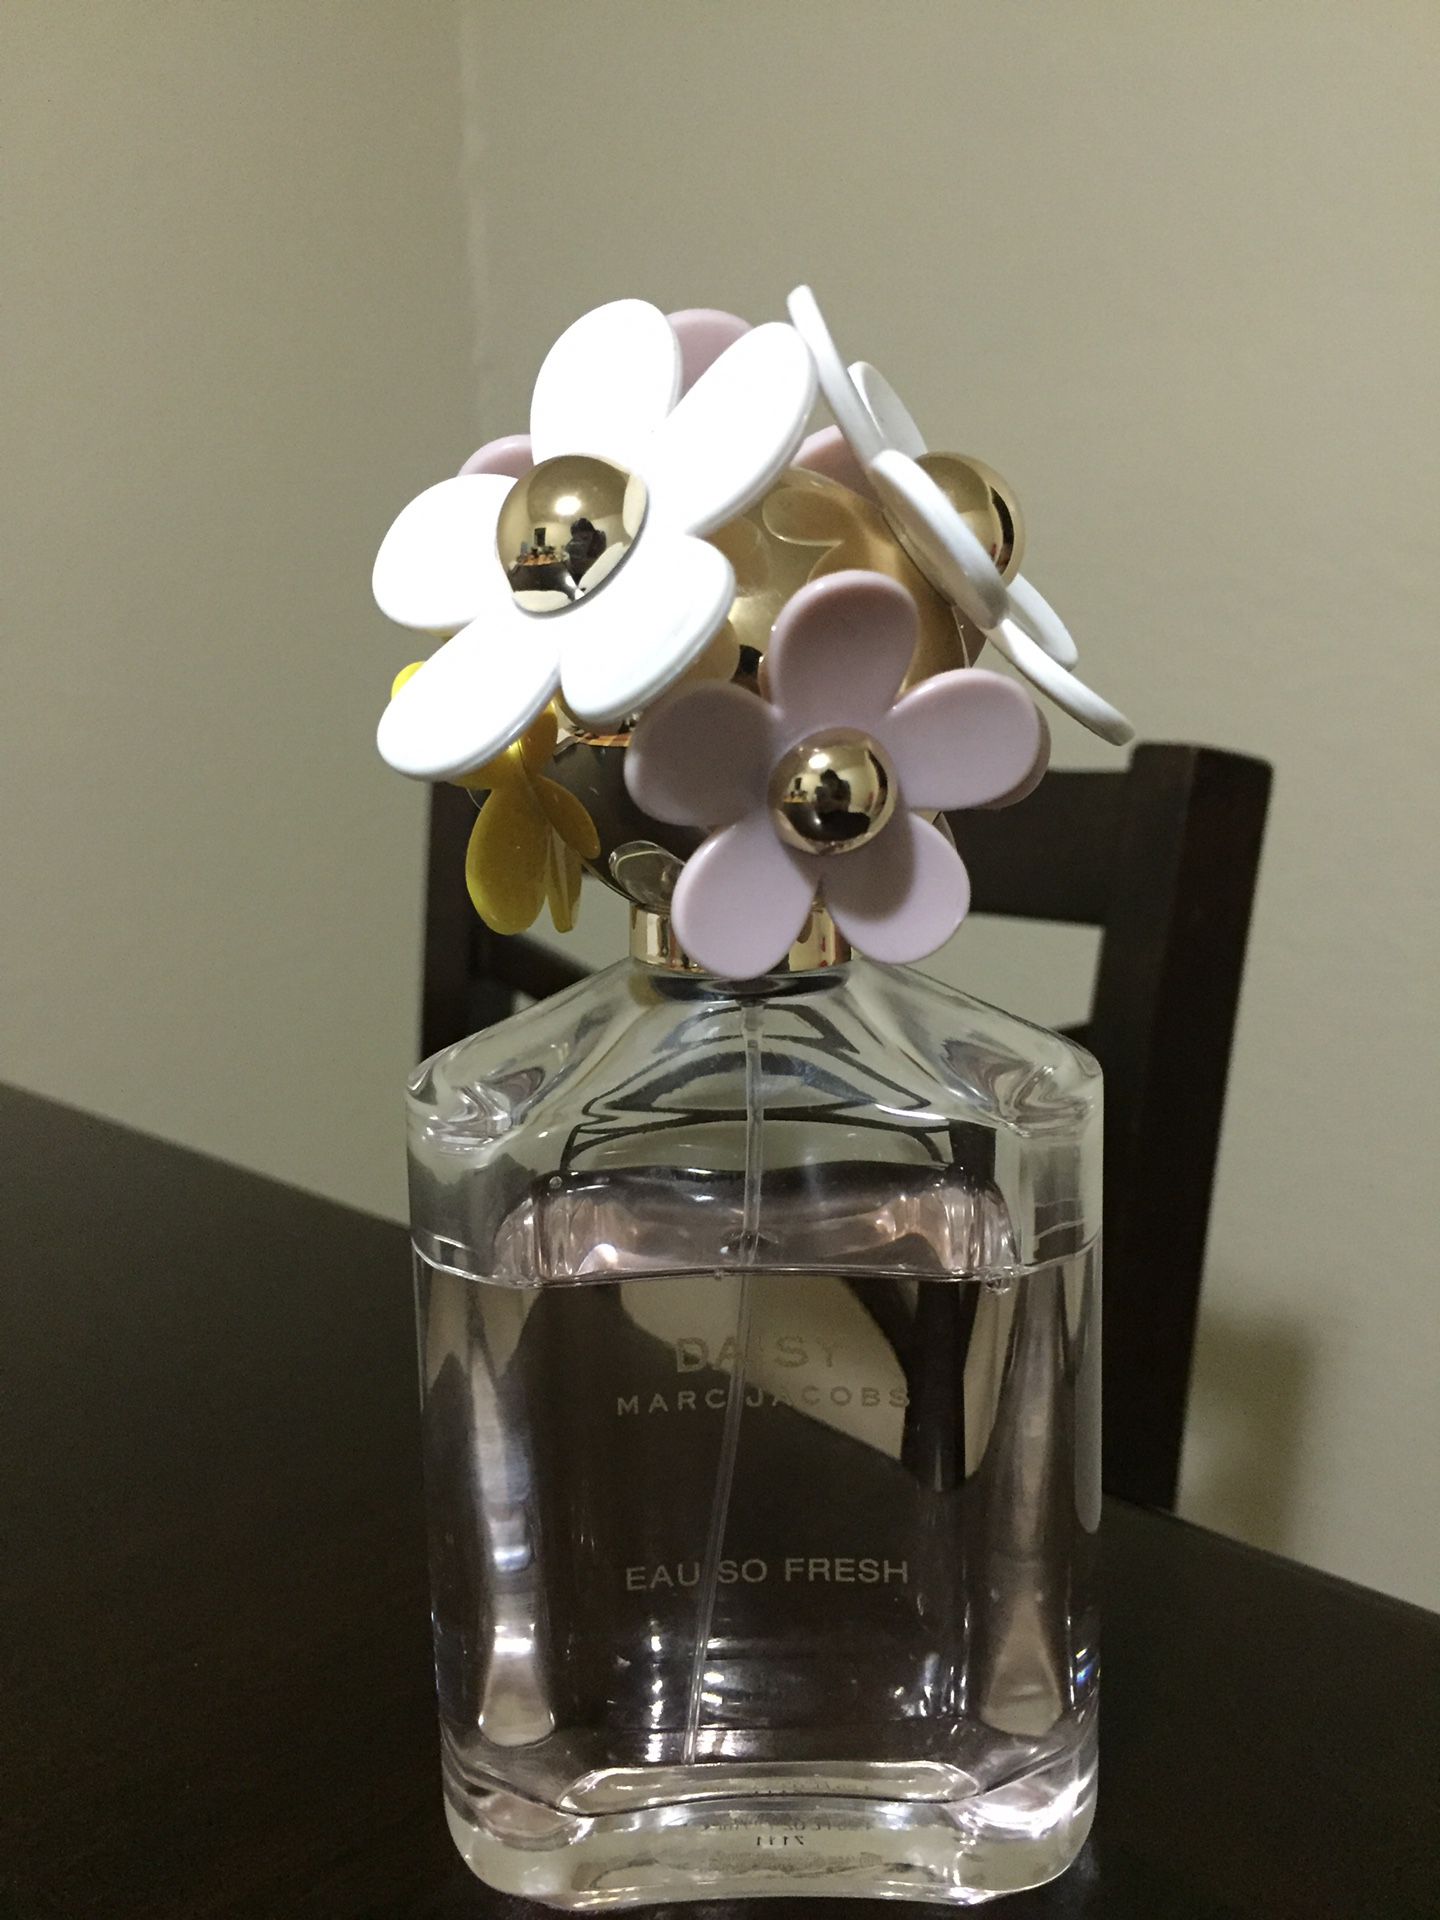 Daisy Marc Jacobs perfume for women pink flowers 4.25 fl oz